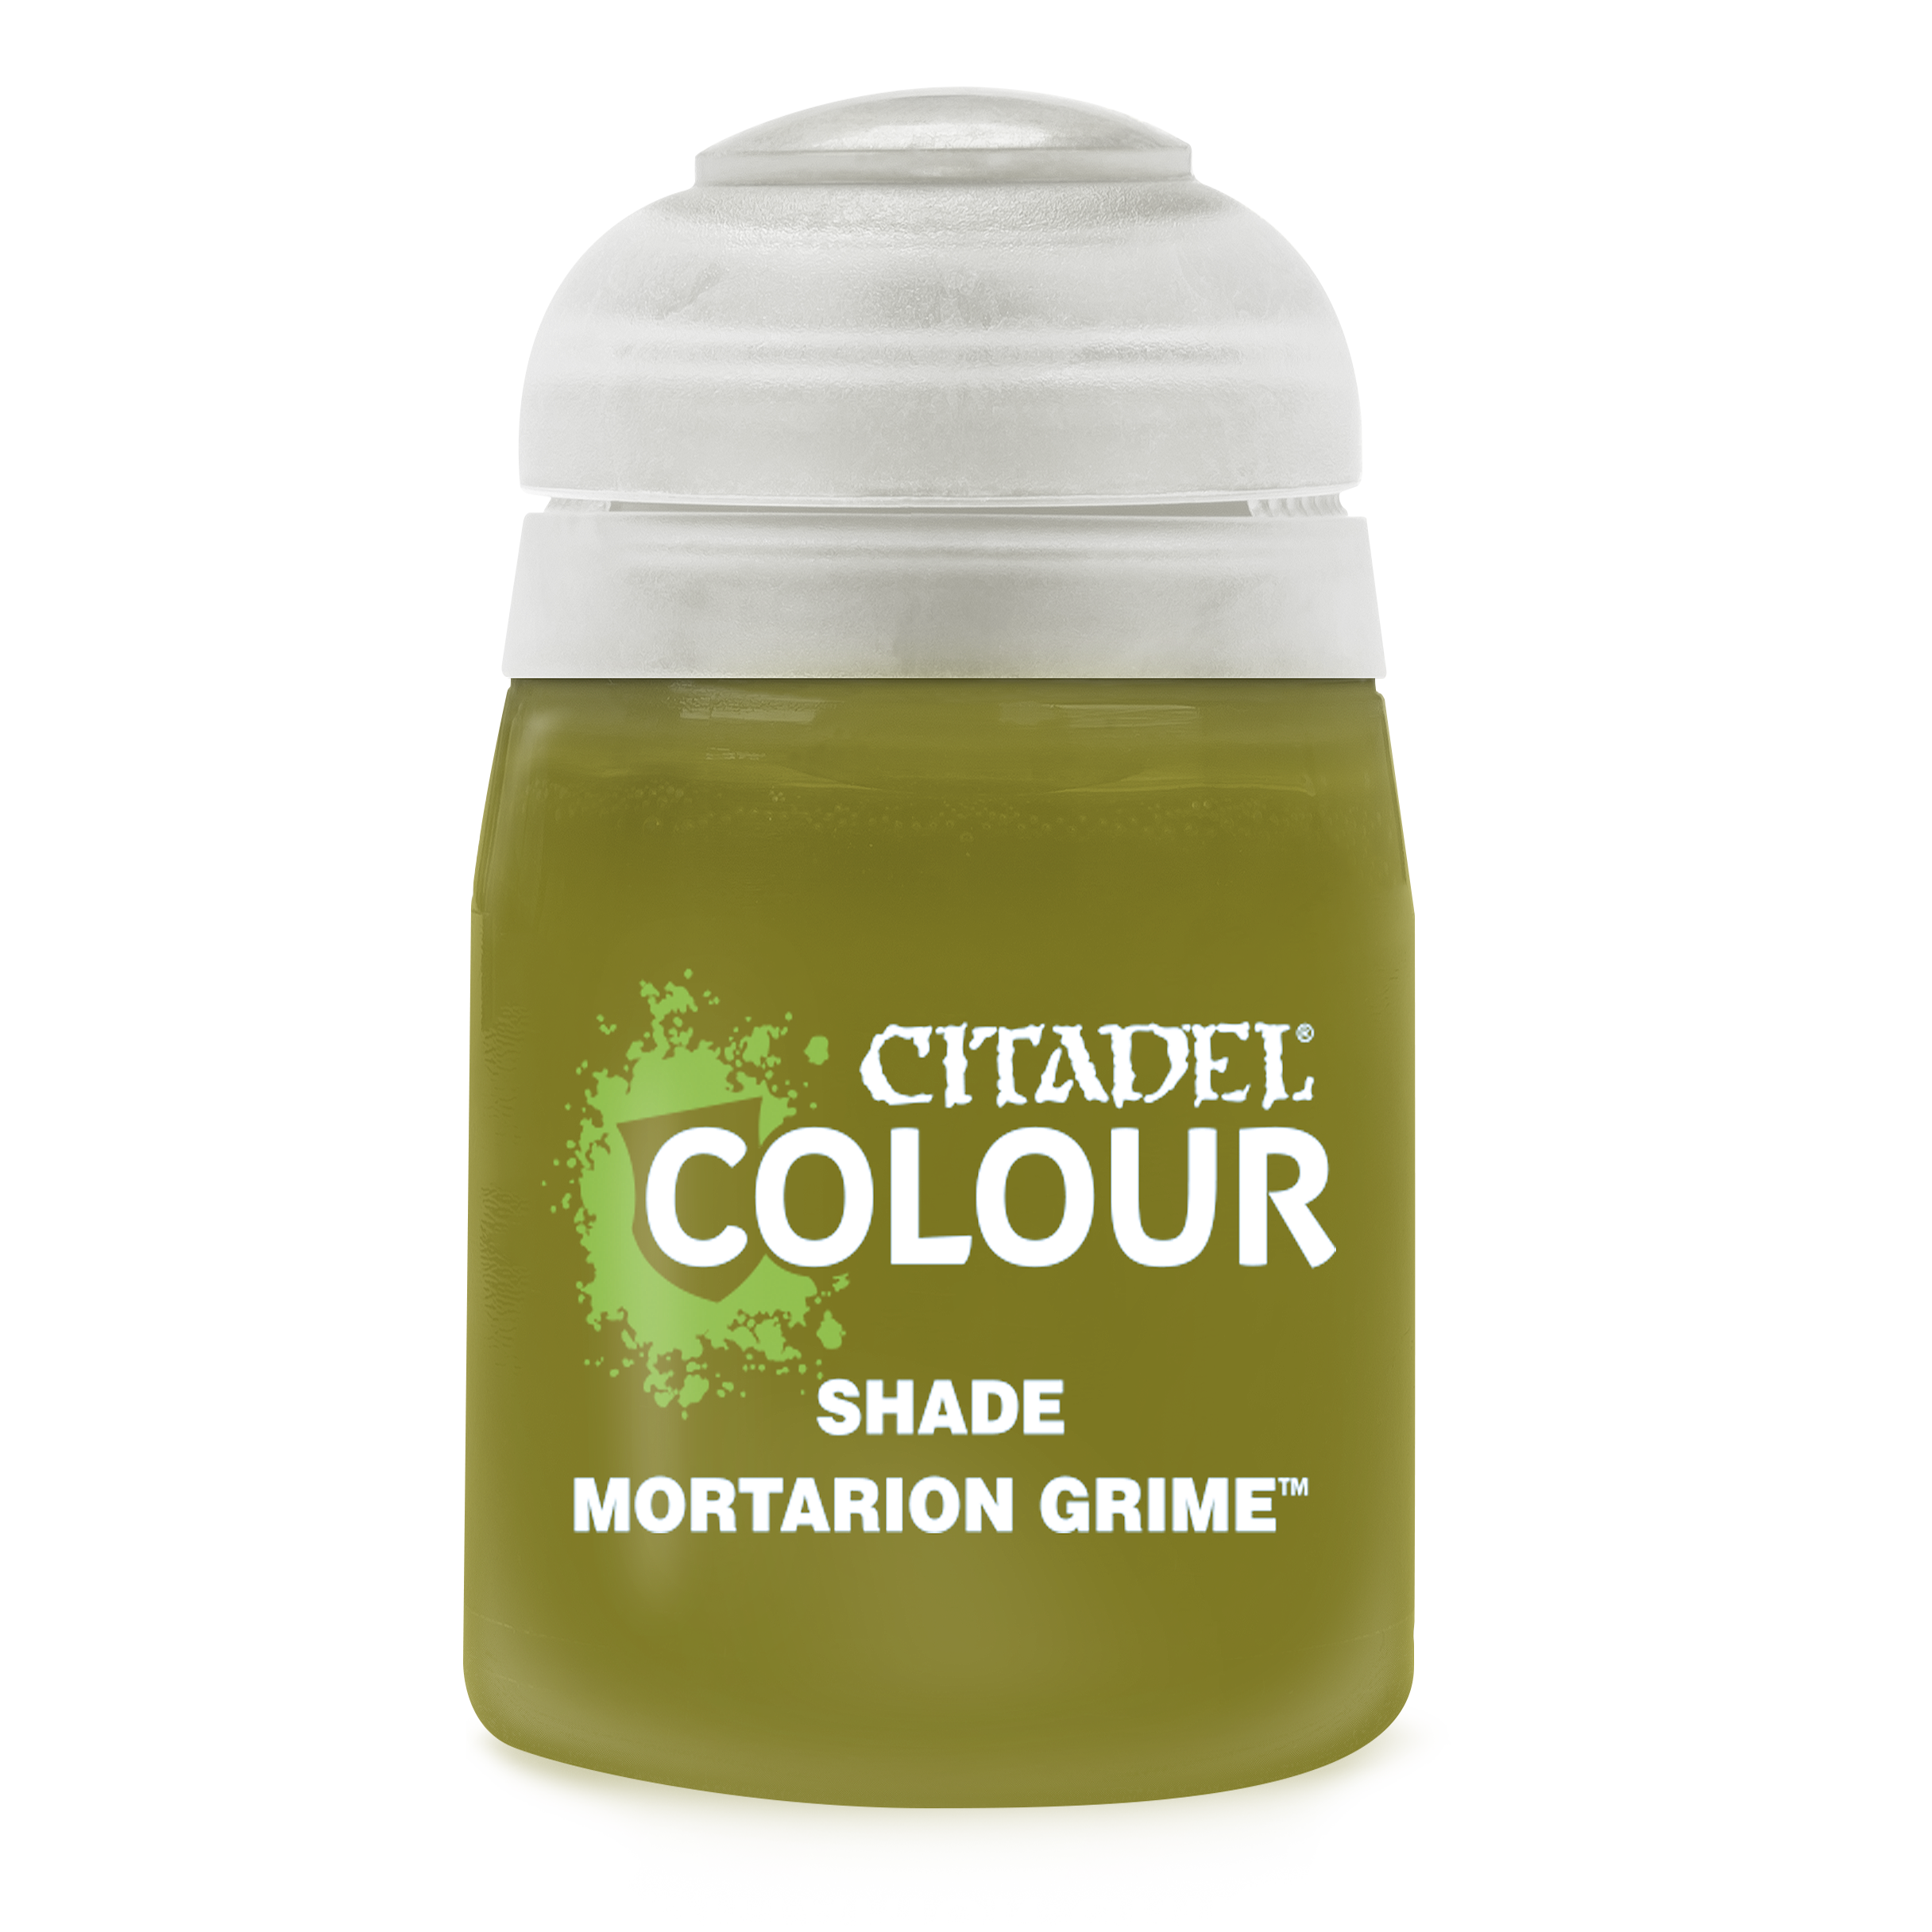 Mortarion Grime Citadel Shade Paint | Lots Moore NSW